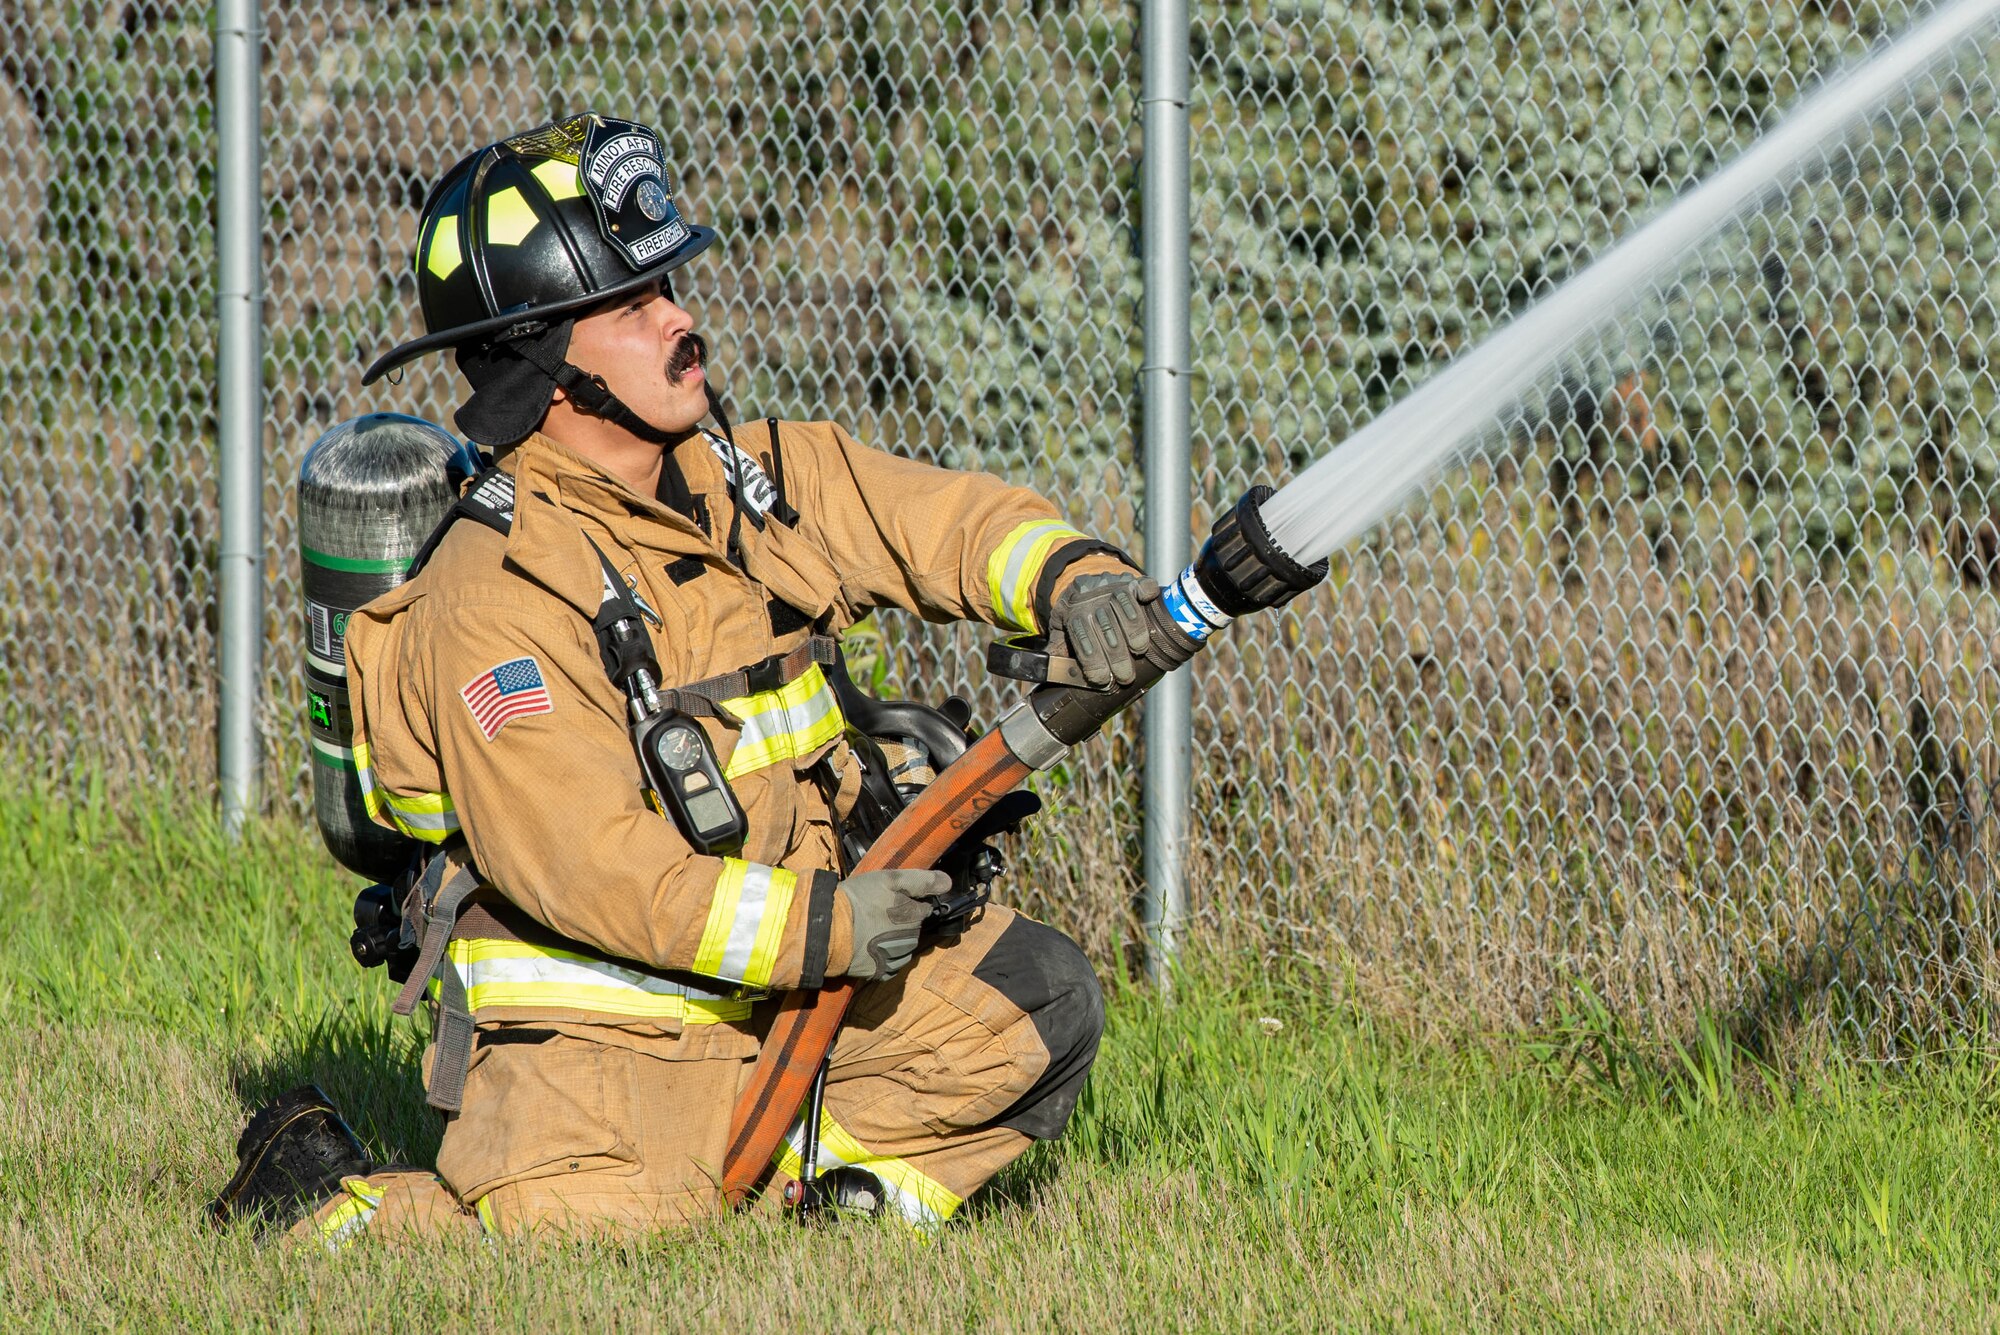 Senior Airman Brandon Valle, 5th Civil Engineer Squadron lead firefighter, discharges a fire hose during a National Fire Protection Association (NFPA) 1410 drill at Minot Air Force Base, North Dakota, Oct. 4, 2023. Team Minot’s firefighters regularly perform drills like the NFPA 1410 to ensure they are prepared to respond in the event of fire emergency situations. (U.S. Air Force photo by Airman 1st Class Kyle Wilson)